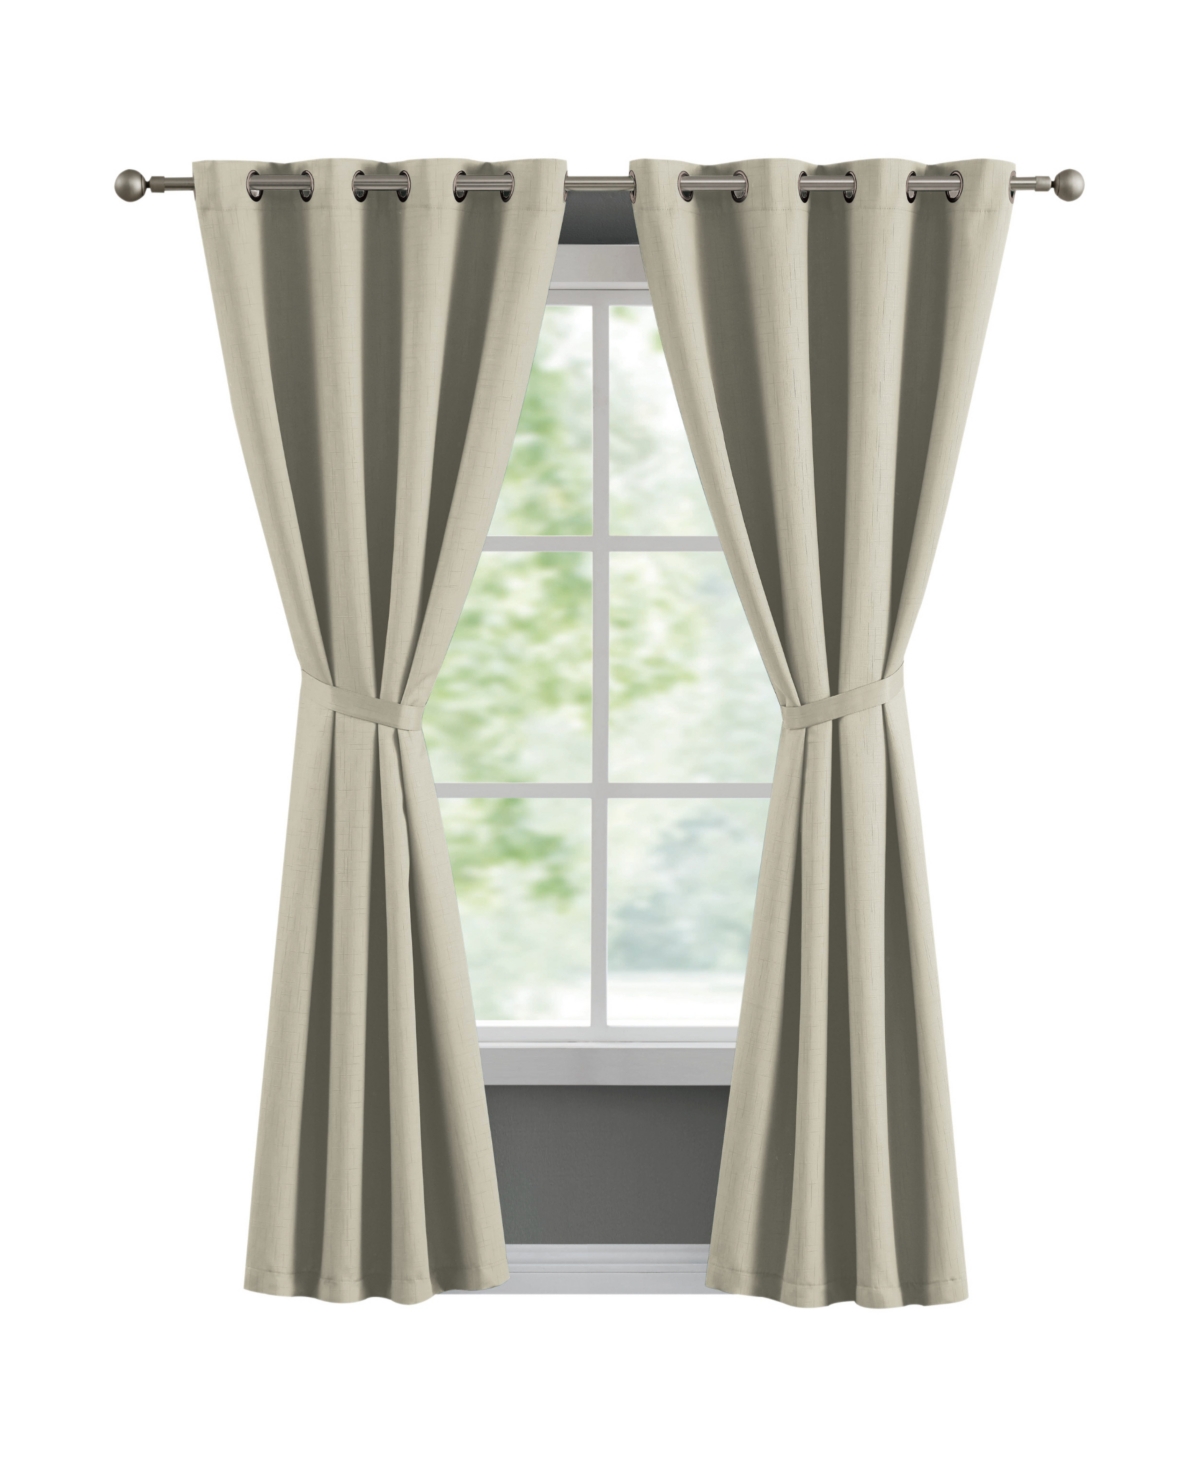 FRENCH CONNECTION EBONY THERMAL WOVEN ROOM DARKENING GROMMET WINDOW CURTAIN PANEL PAIR WITH TIEBACKS, 50" X 96"